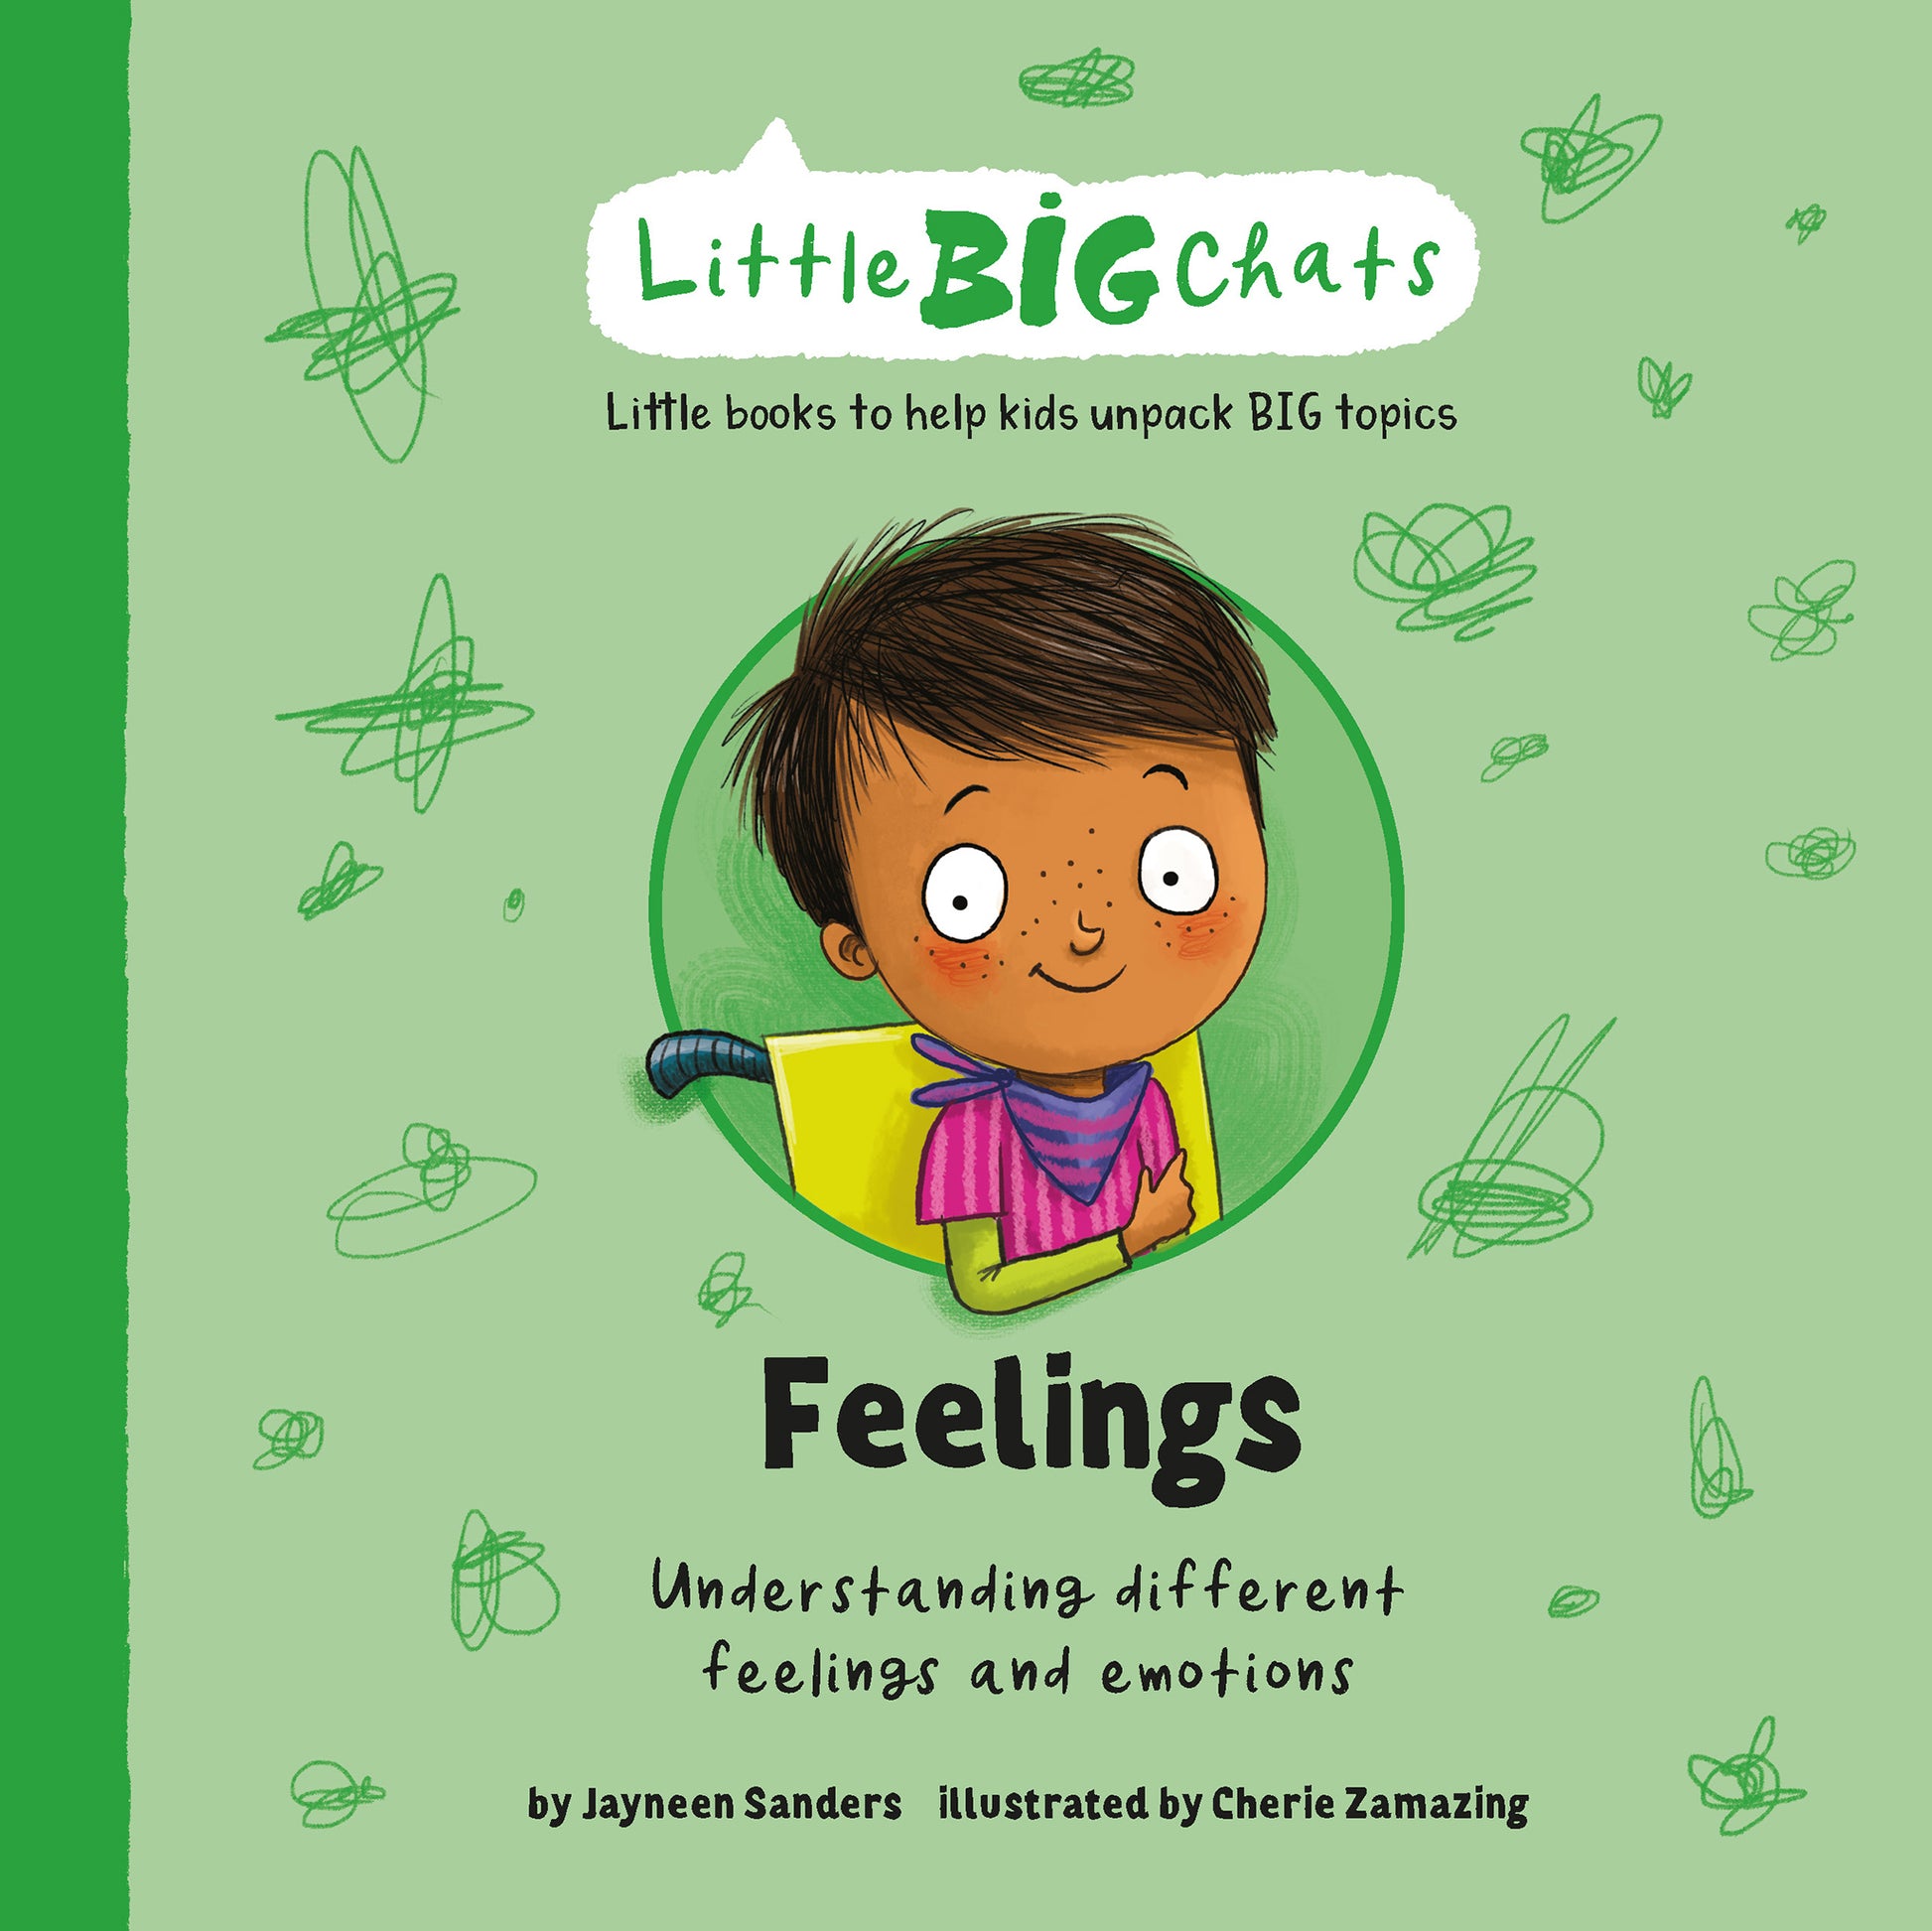 The cover of the Little BIG Chats book ‘Feelings’ by Jayneen Sanders.